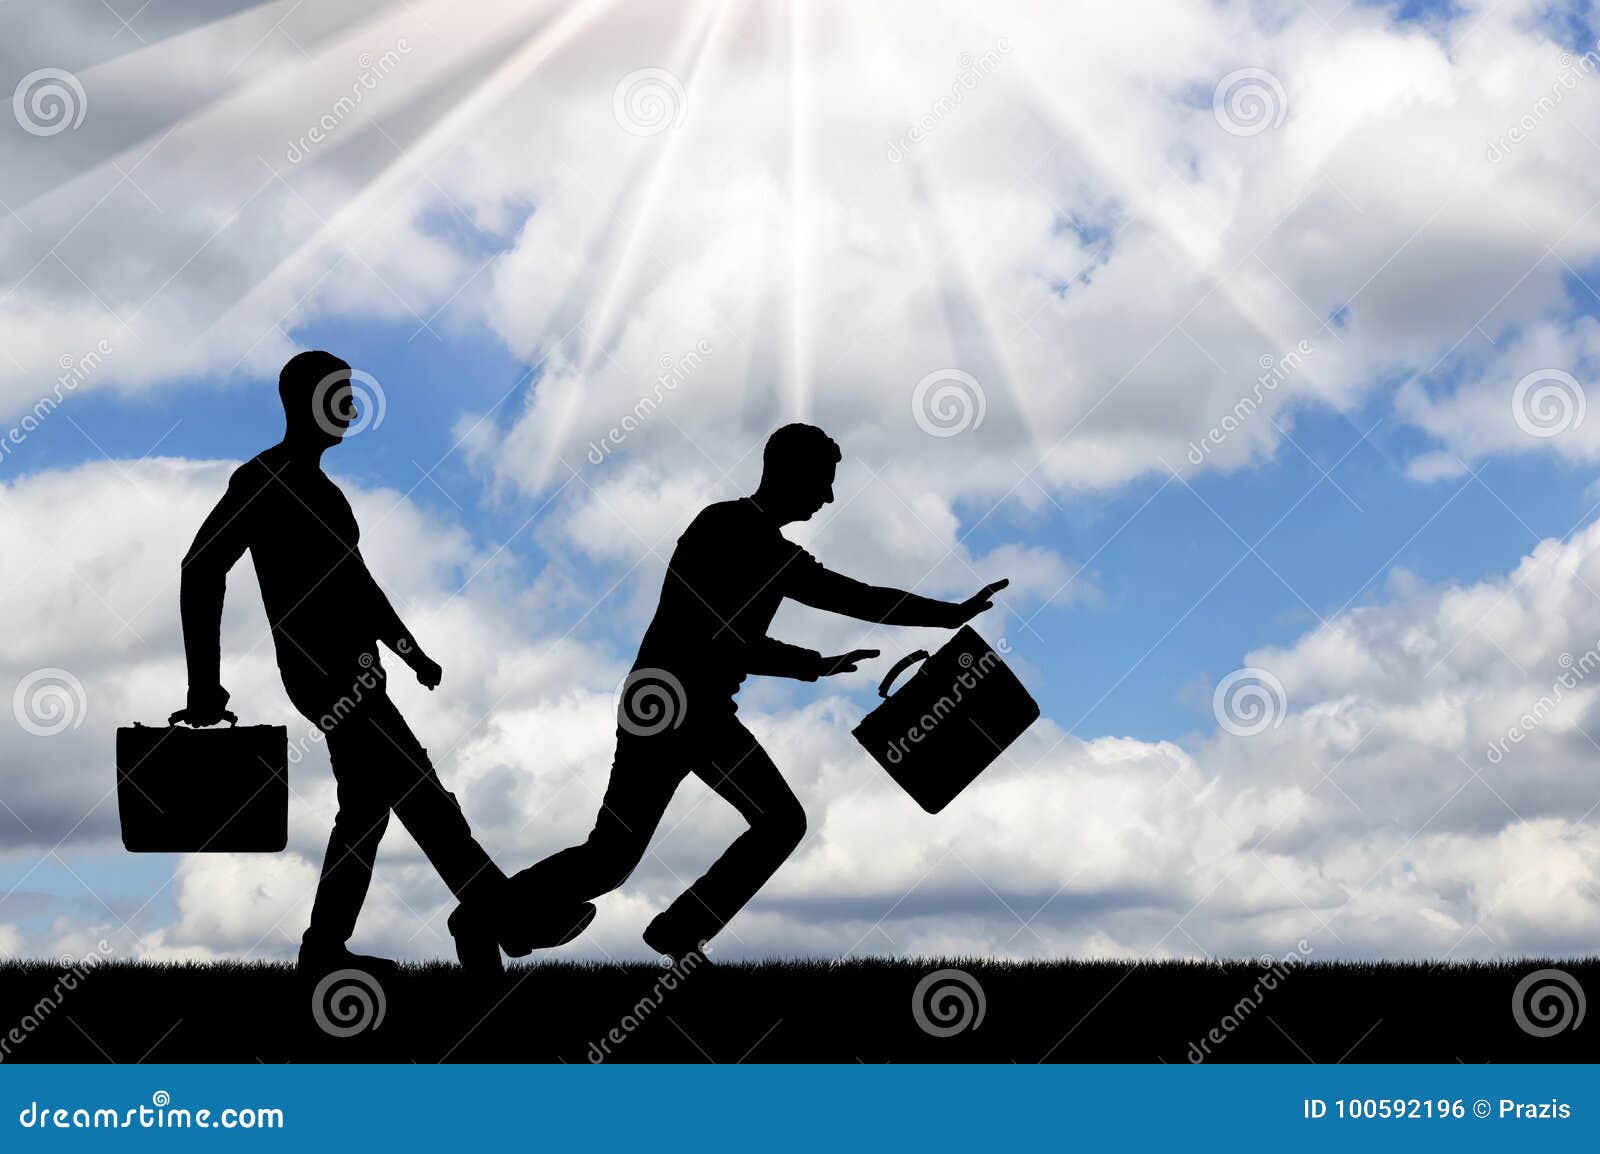 Concept of Risk and Betrayal in Business Stock Photo - Image of ...